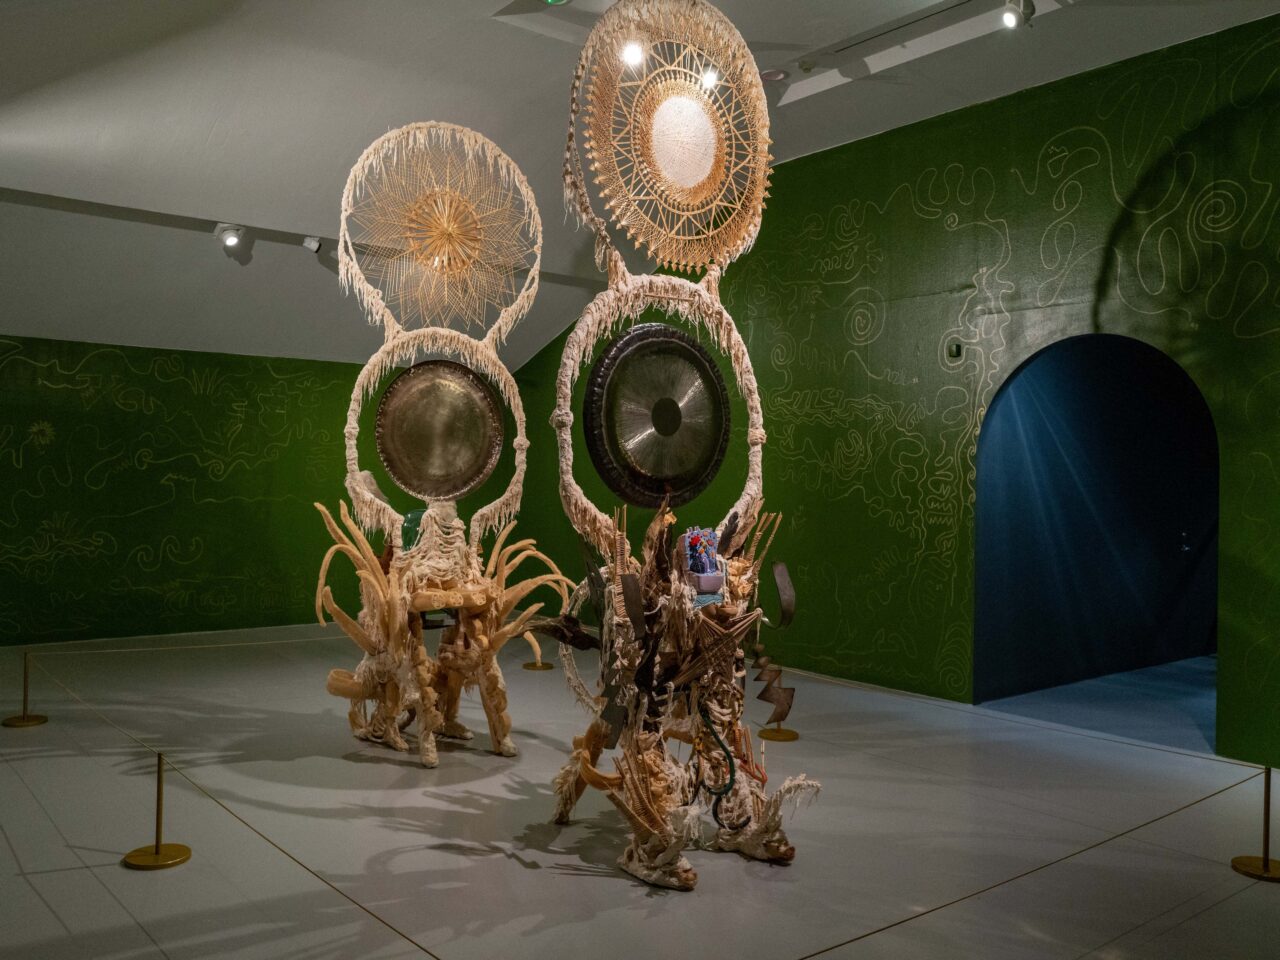 Two assemblies consisting of a gong, a mixture of steel, wood, cotton, glue mixture, plastic, loofah alongside objects collected from a ritual of retracing the artist’s original migration route. The surrounding walls are green with gold tracings